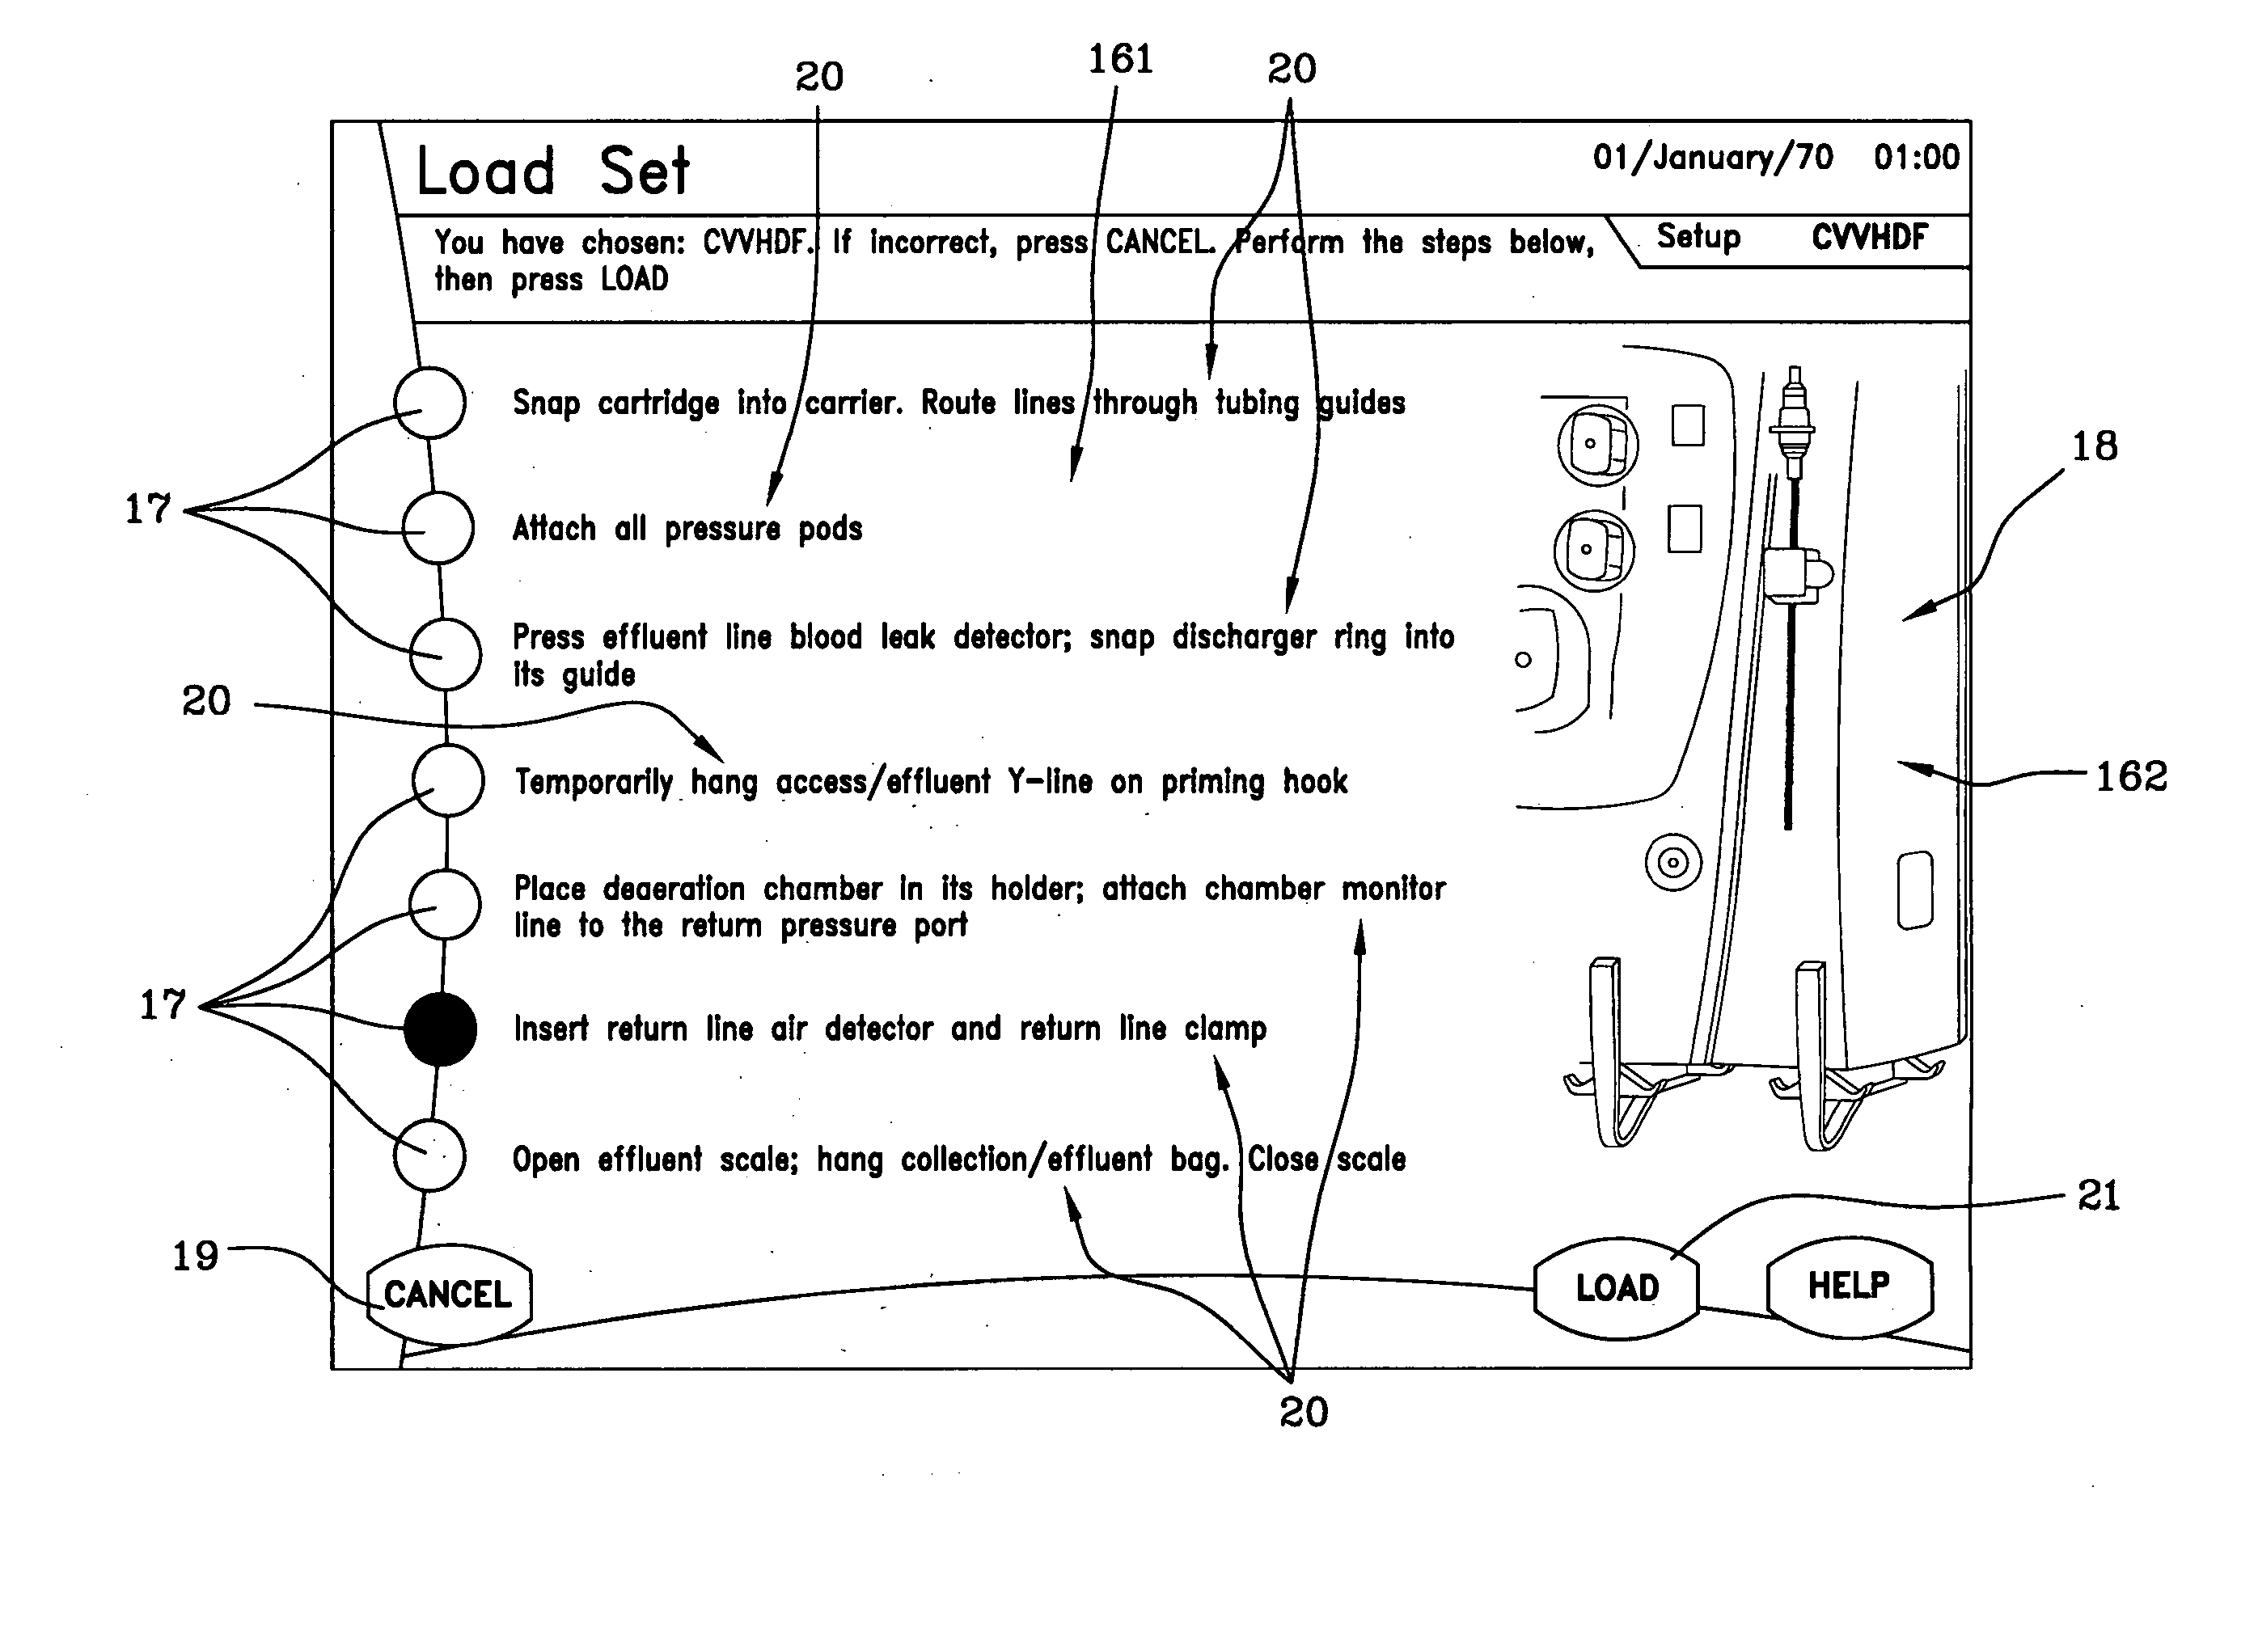 User interface for an extracorporeal blood treatment machine